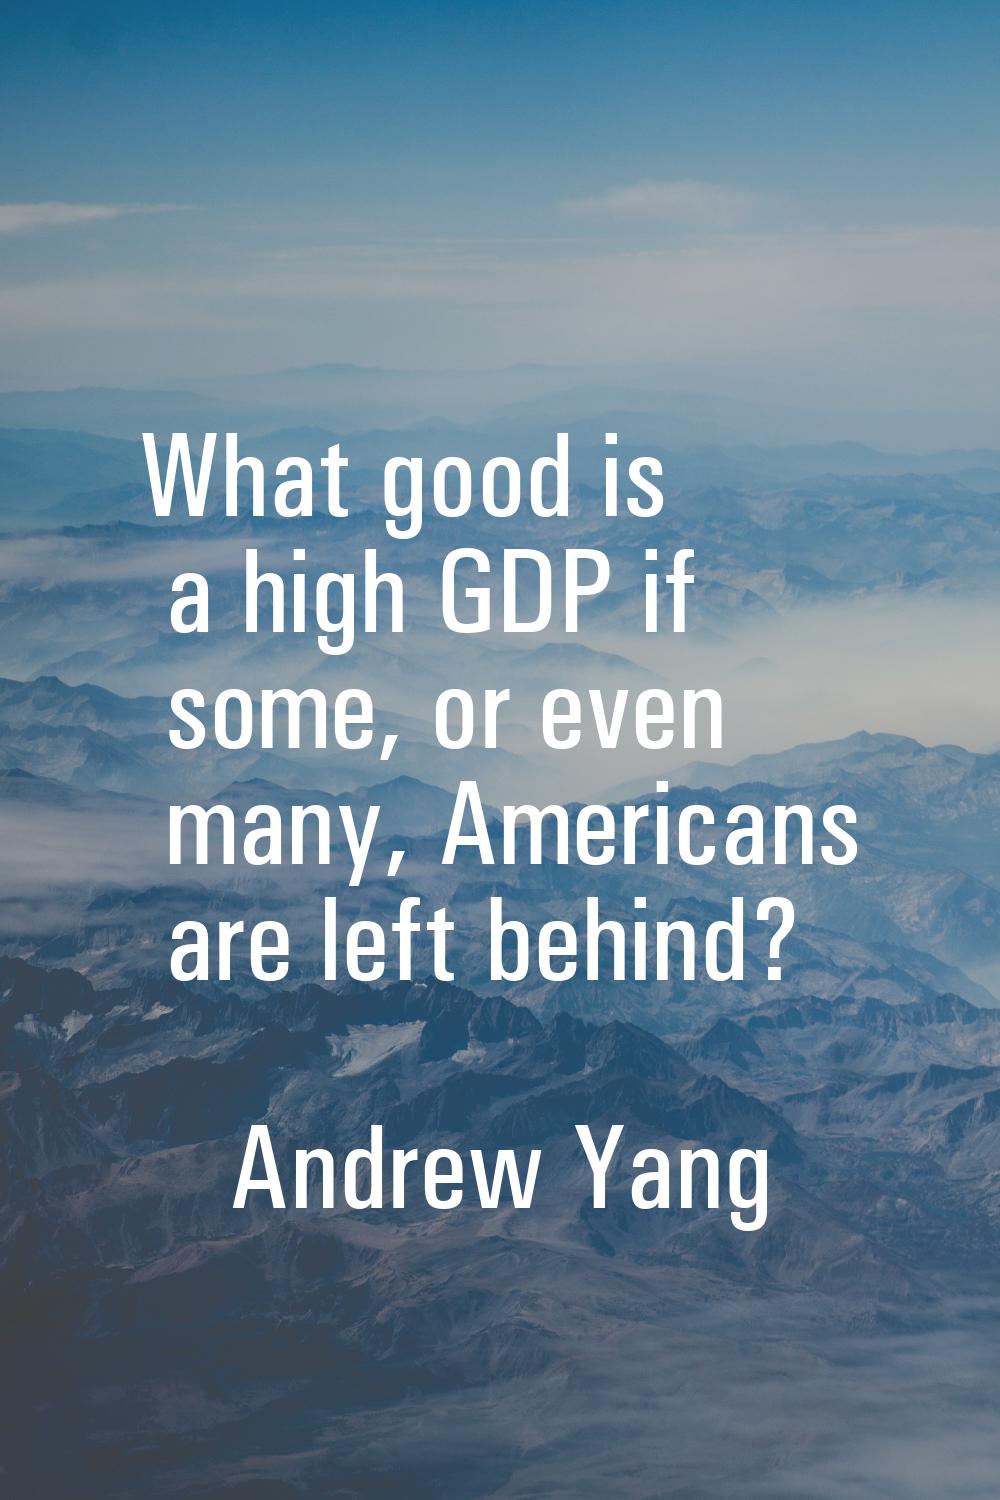 What good is a high GDP if some, or even many, Americans are left behind?